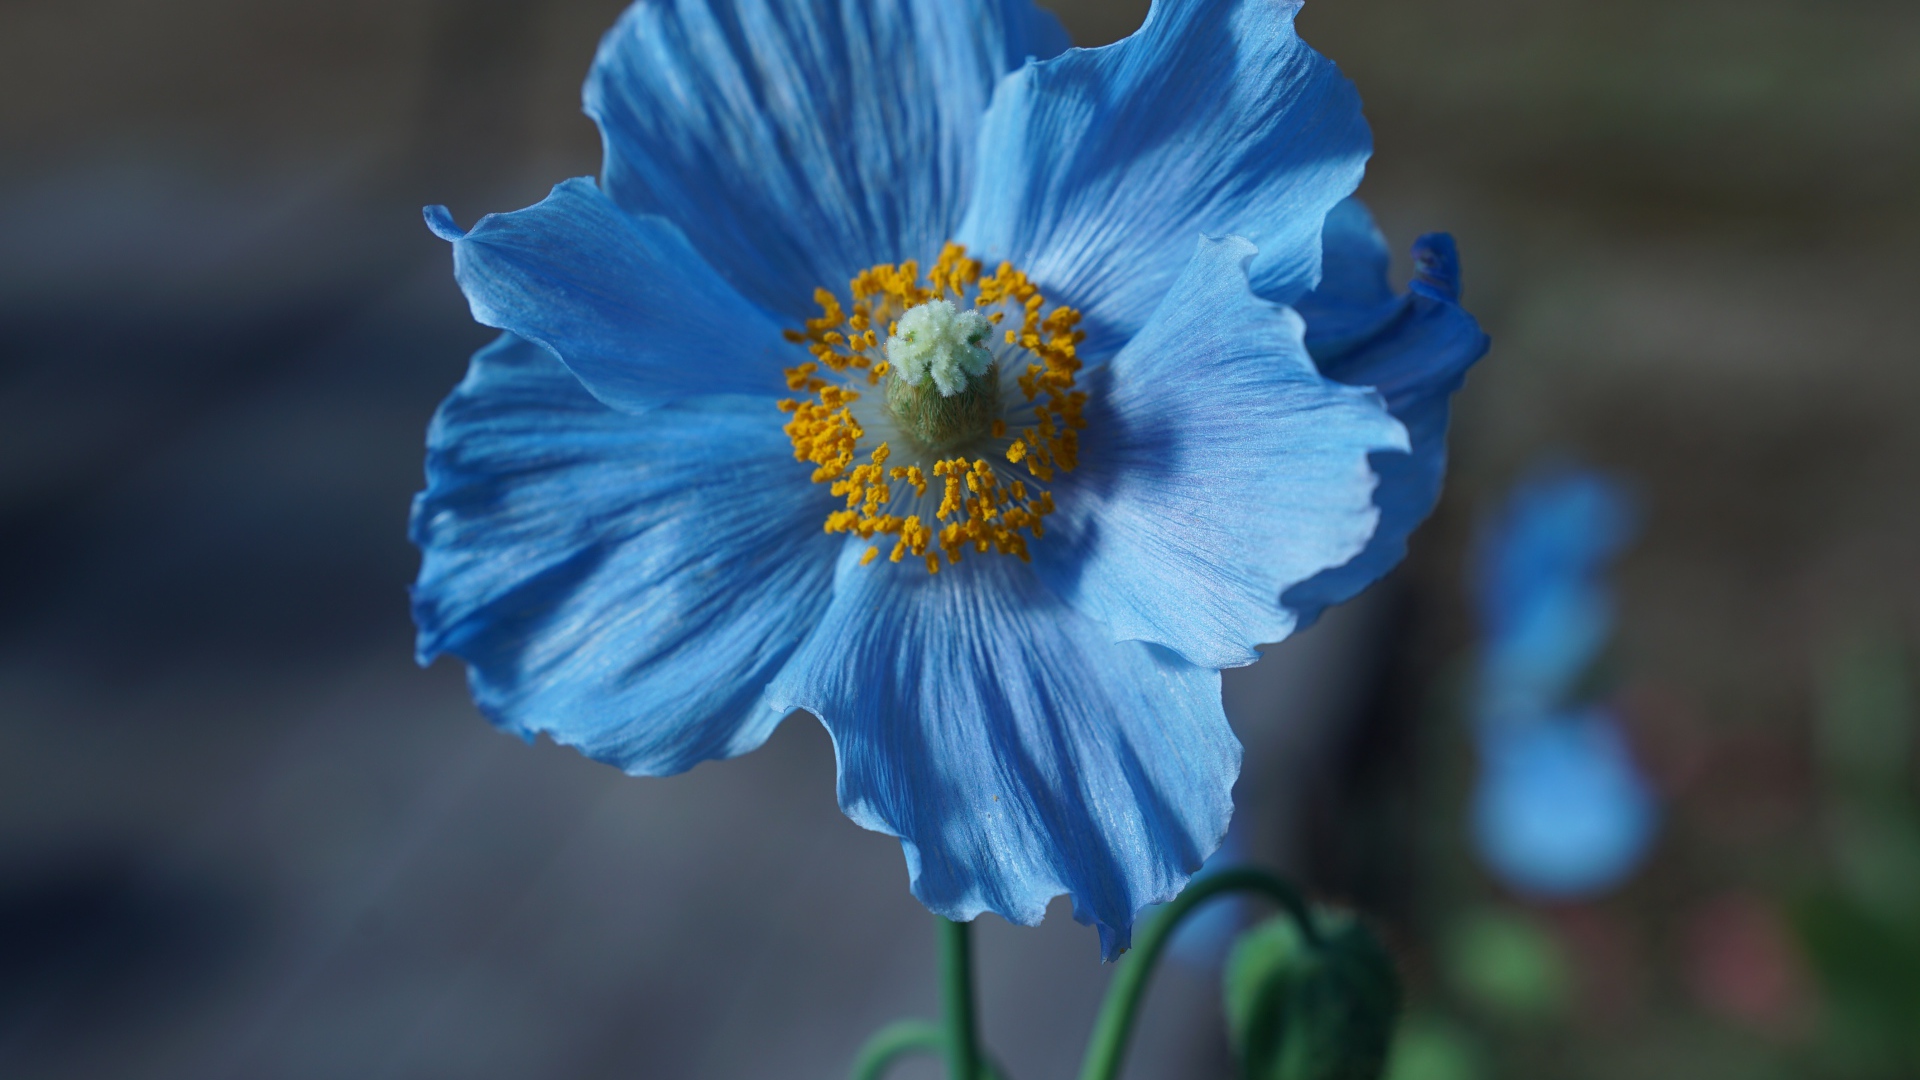 Blue poppy flower with bud close up